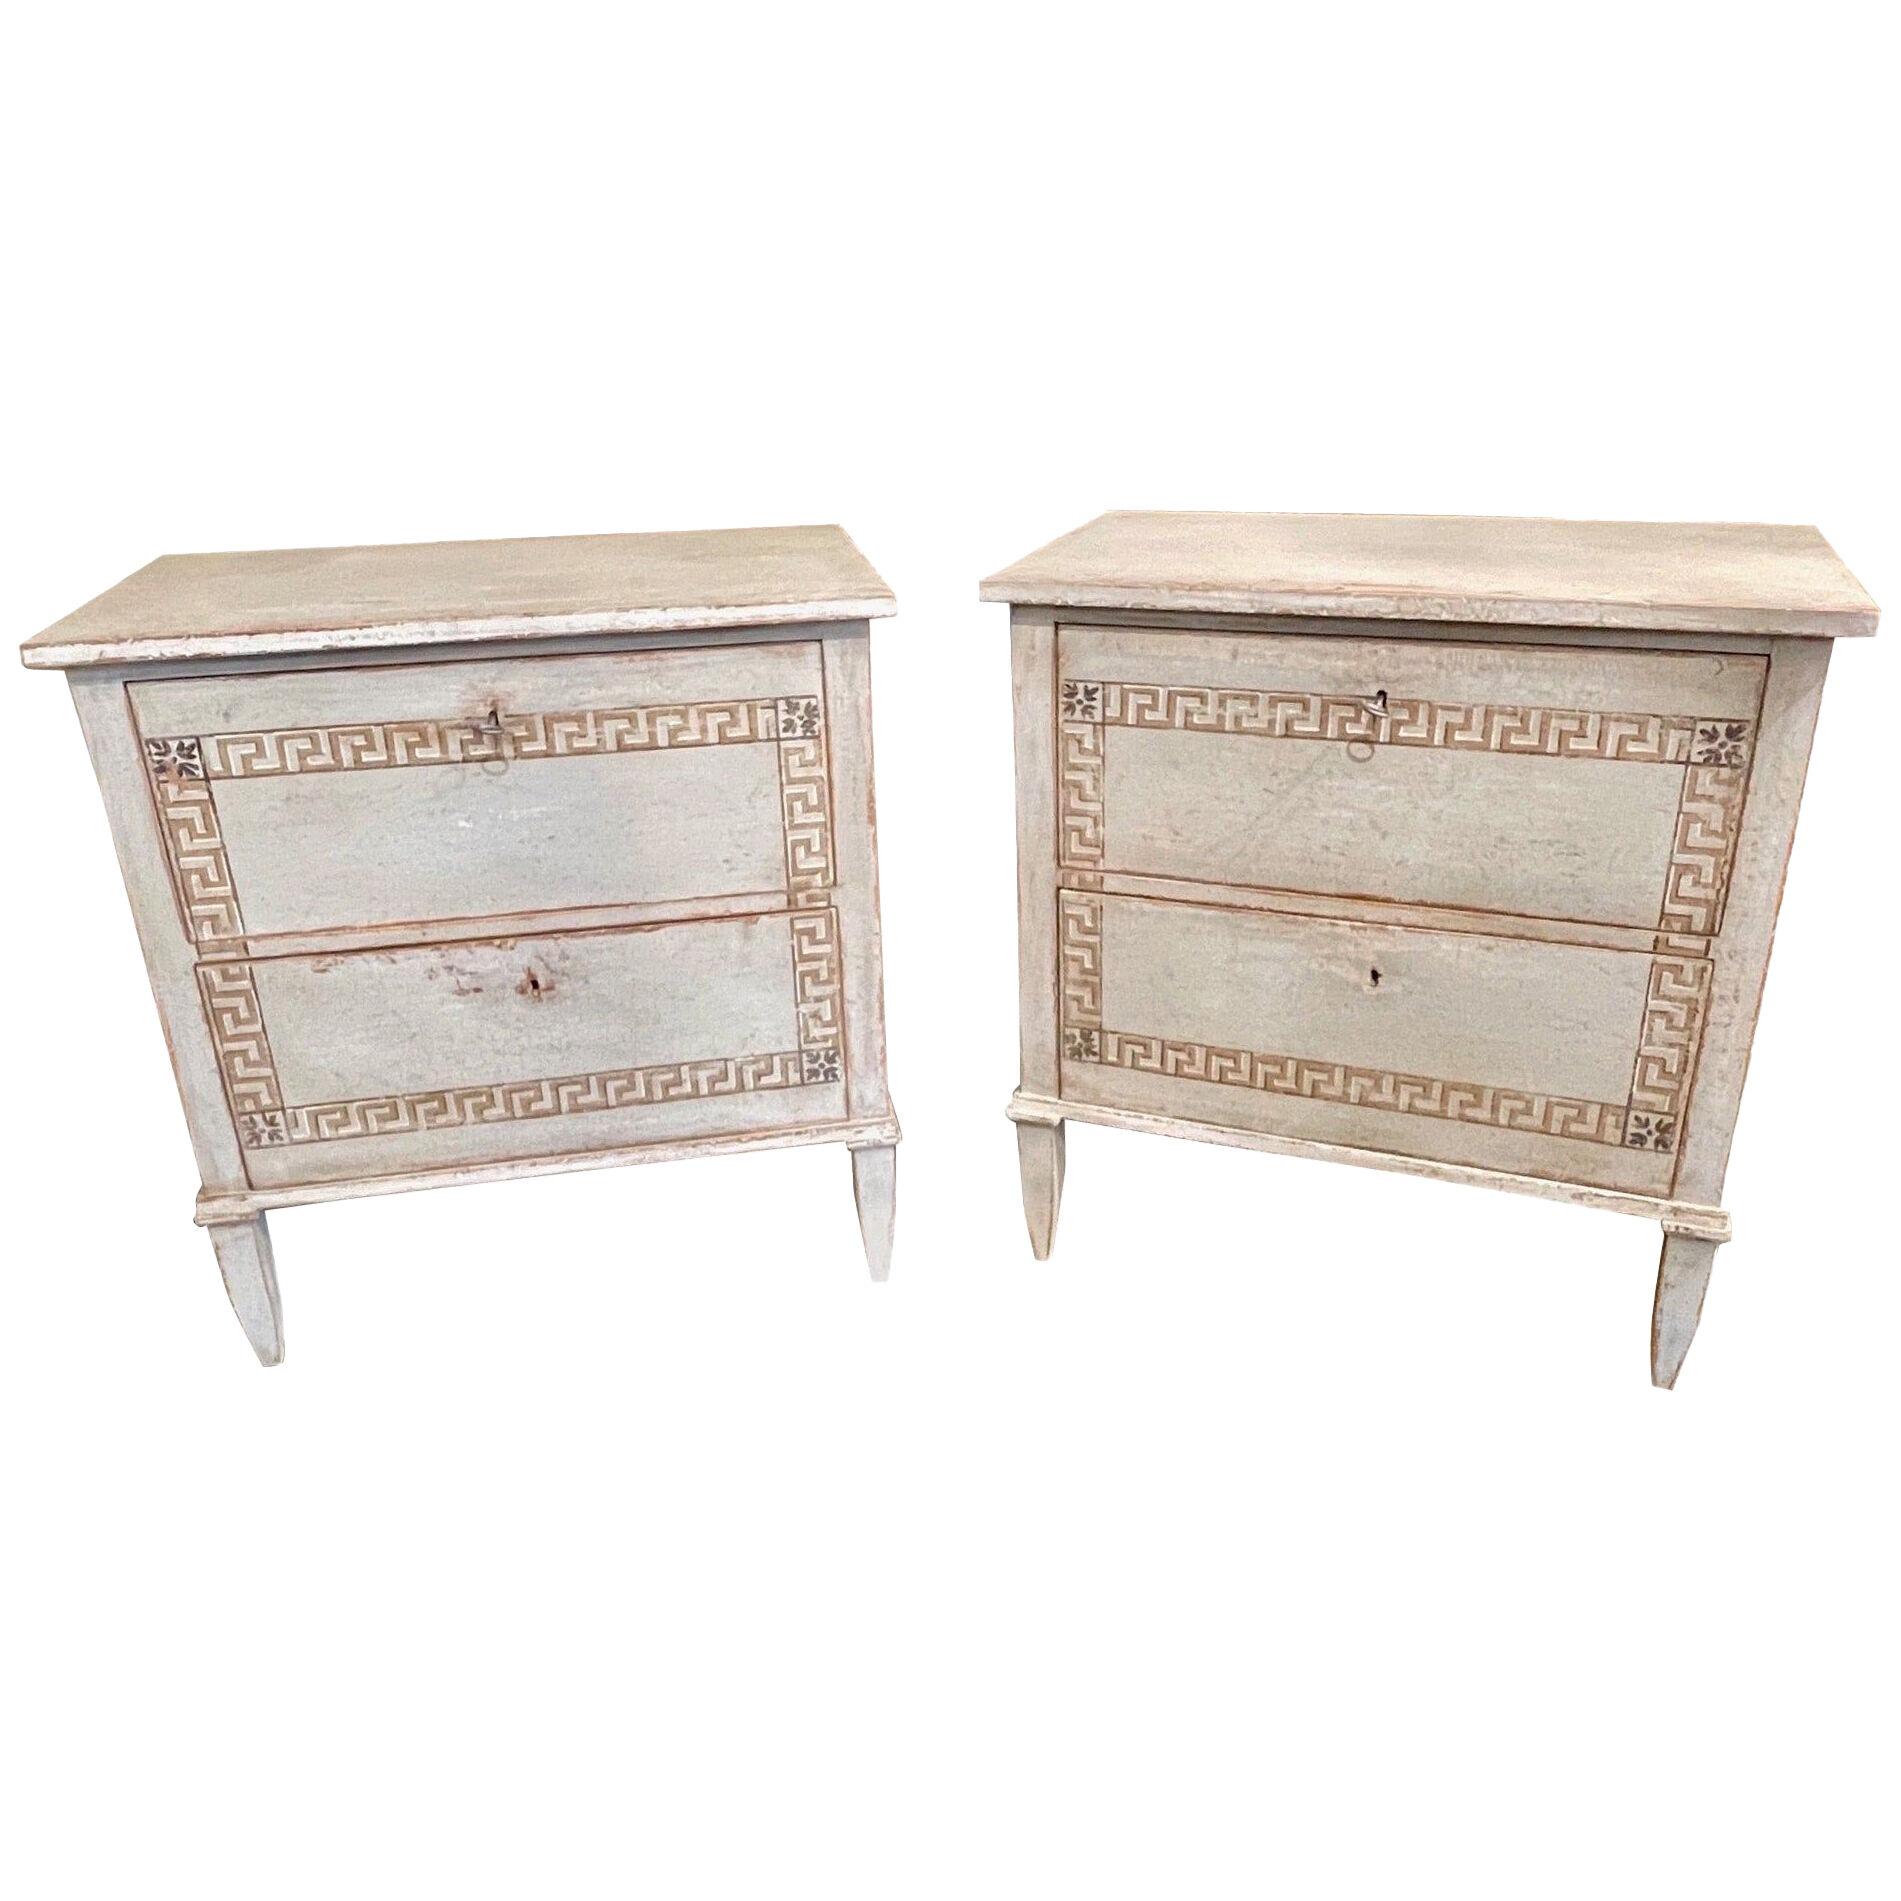 Pair of French Neo-Classical Bed Side Chests with Greek Key Design